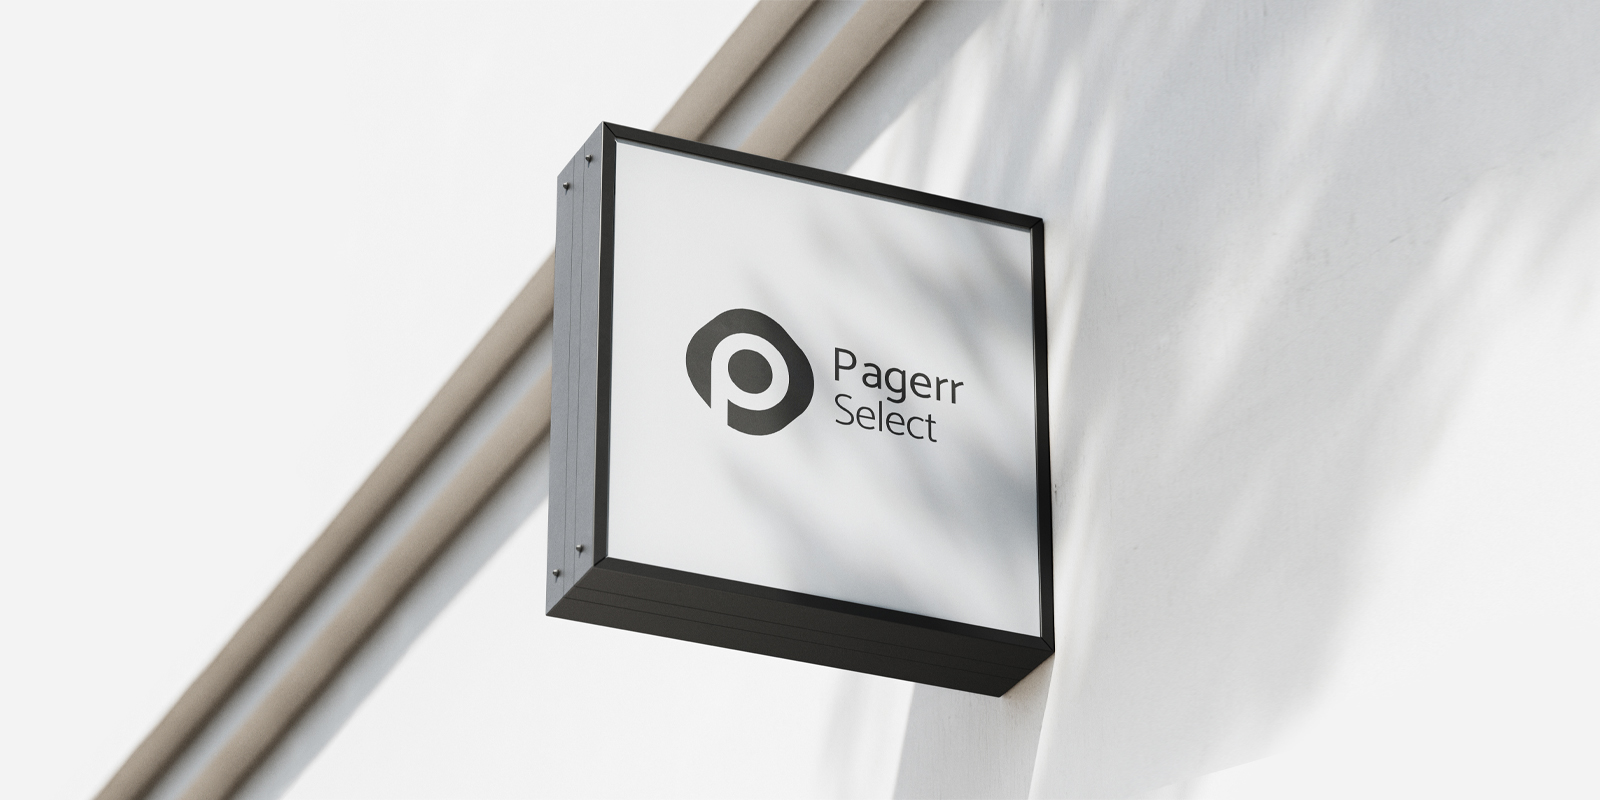 Essential signs in Valencia - Print with Pagerr